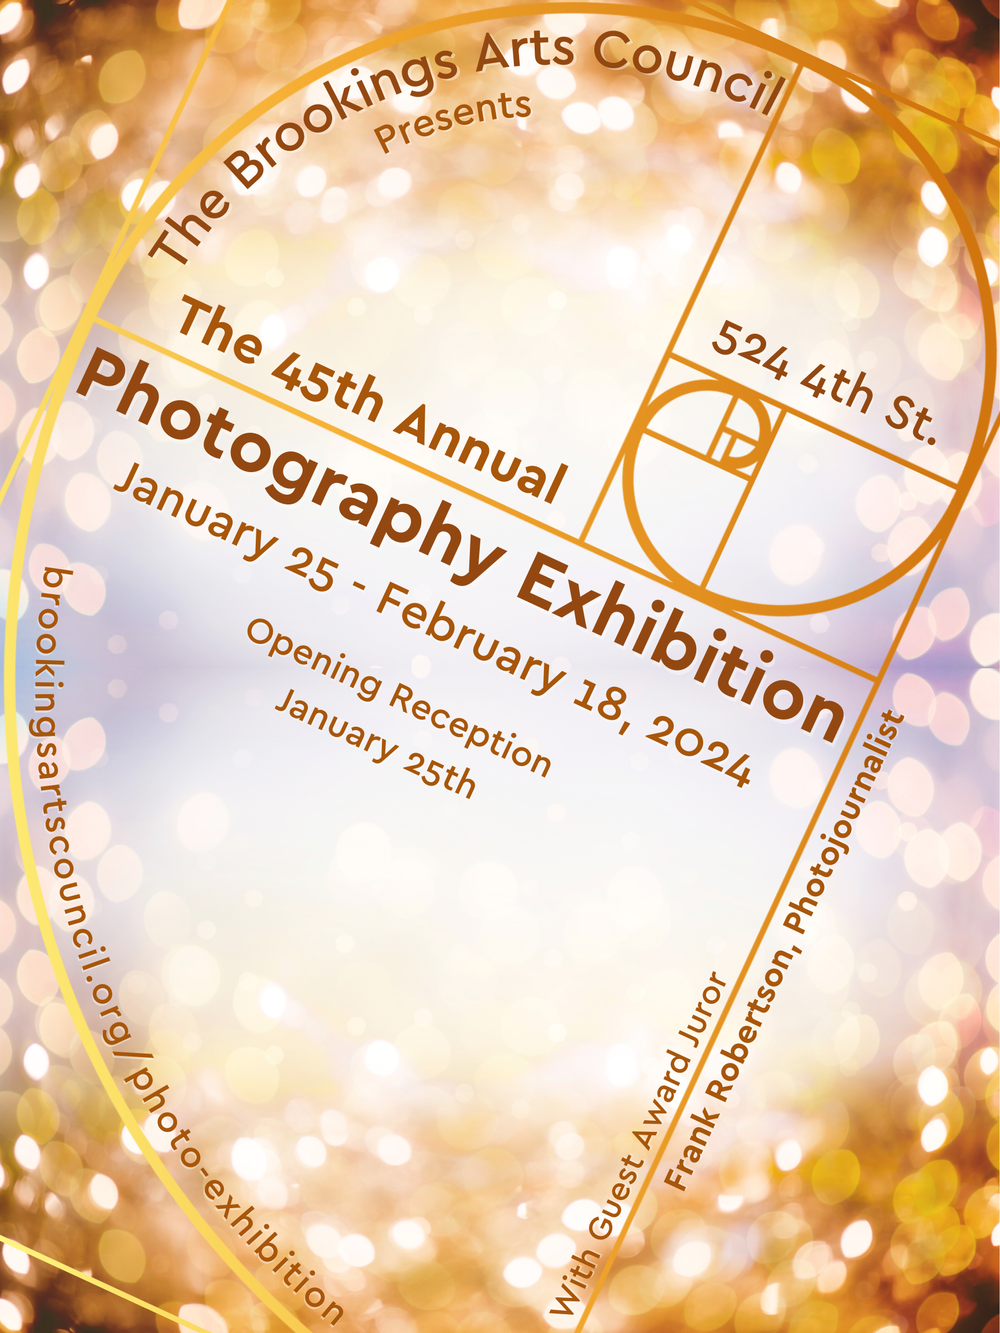 The Brookings Arts Council Photography Exhibition